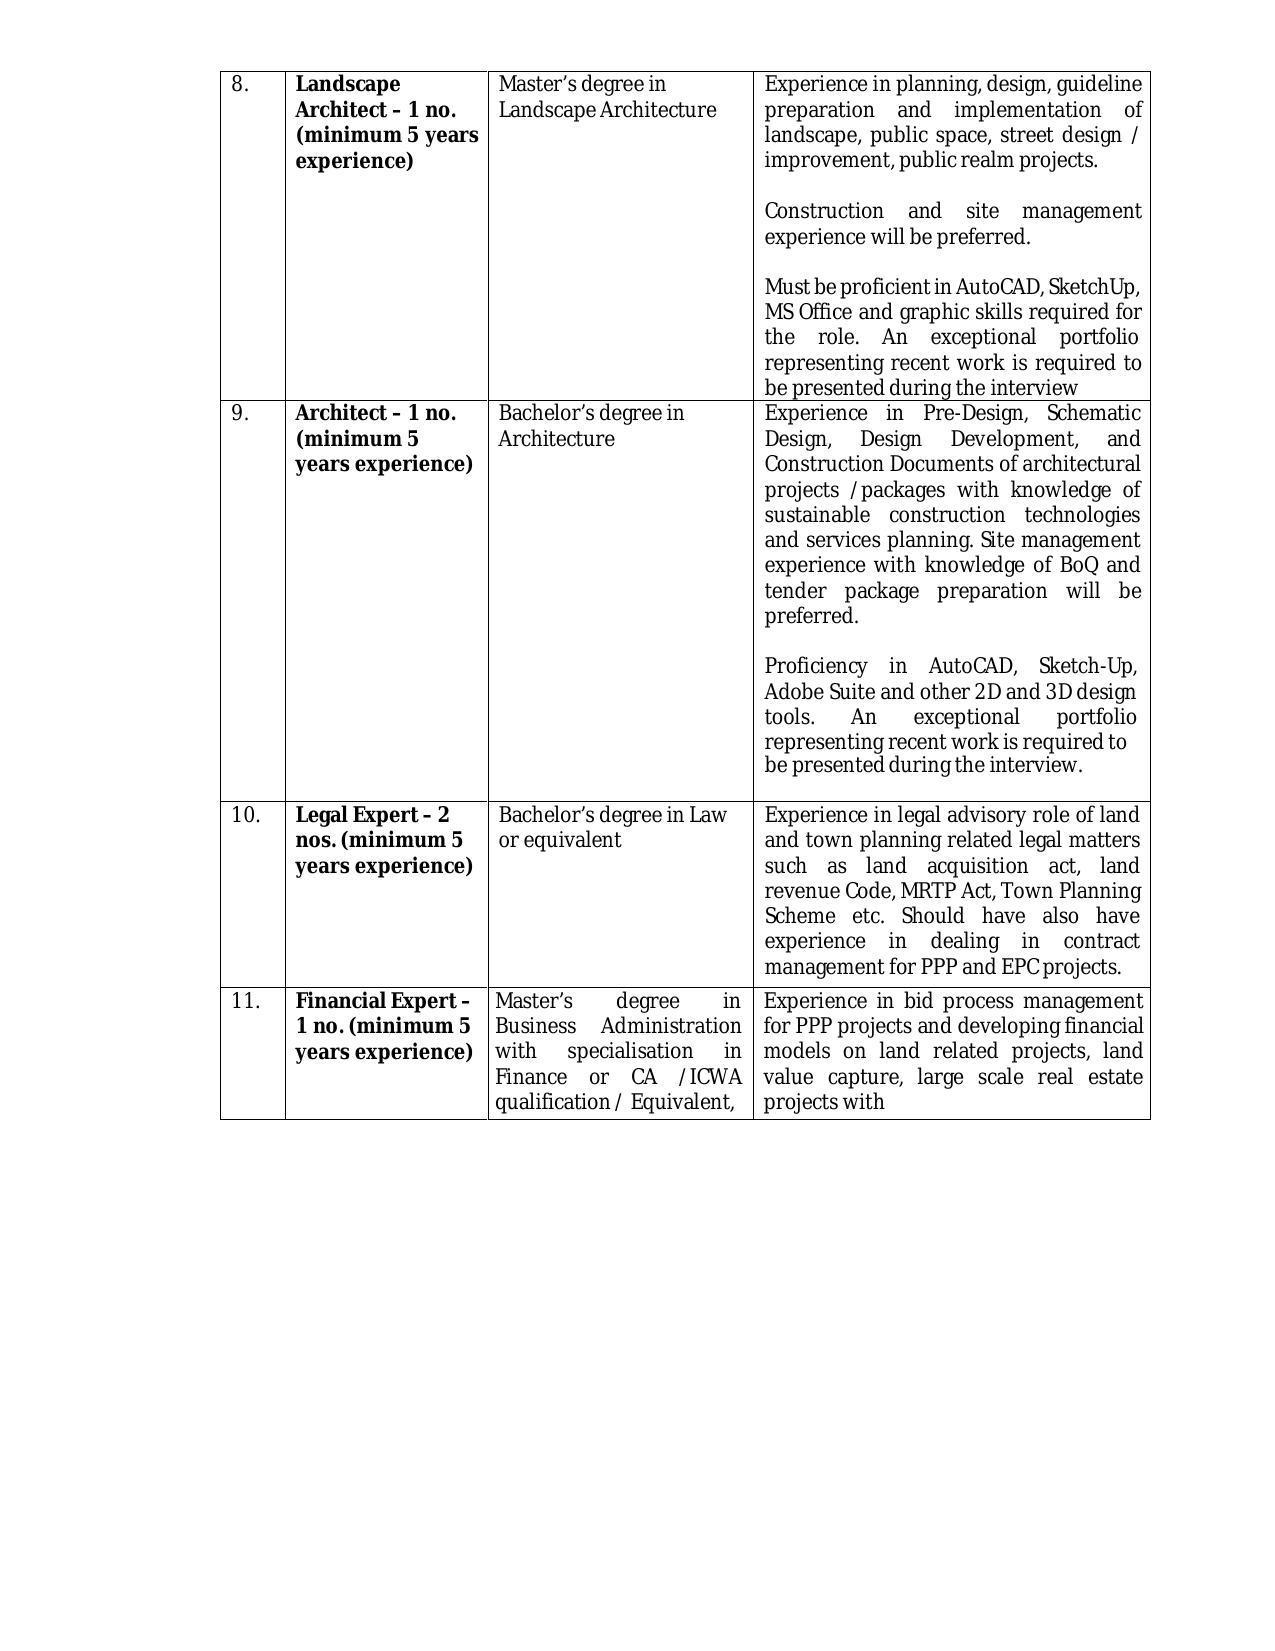 ANIIDCO Invites Application for 18 Environmental Planner, More Vacancies Recruitment 2022 - Page 3